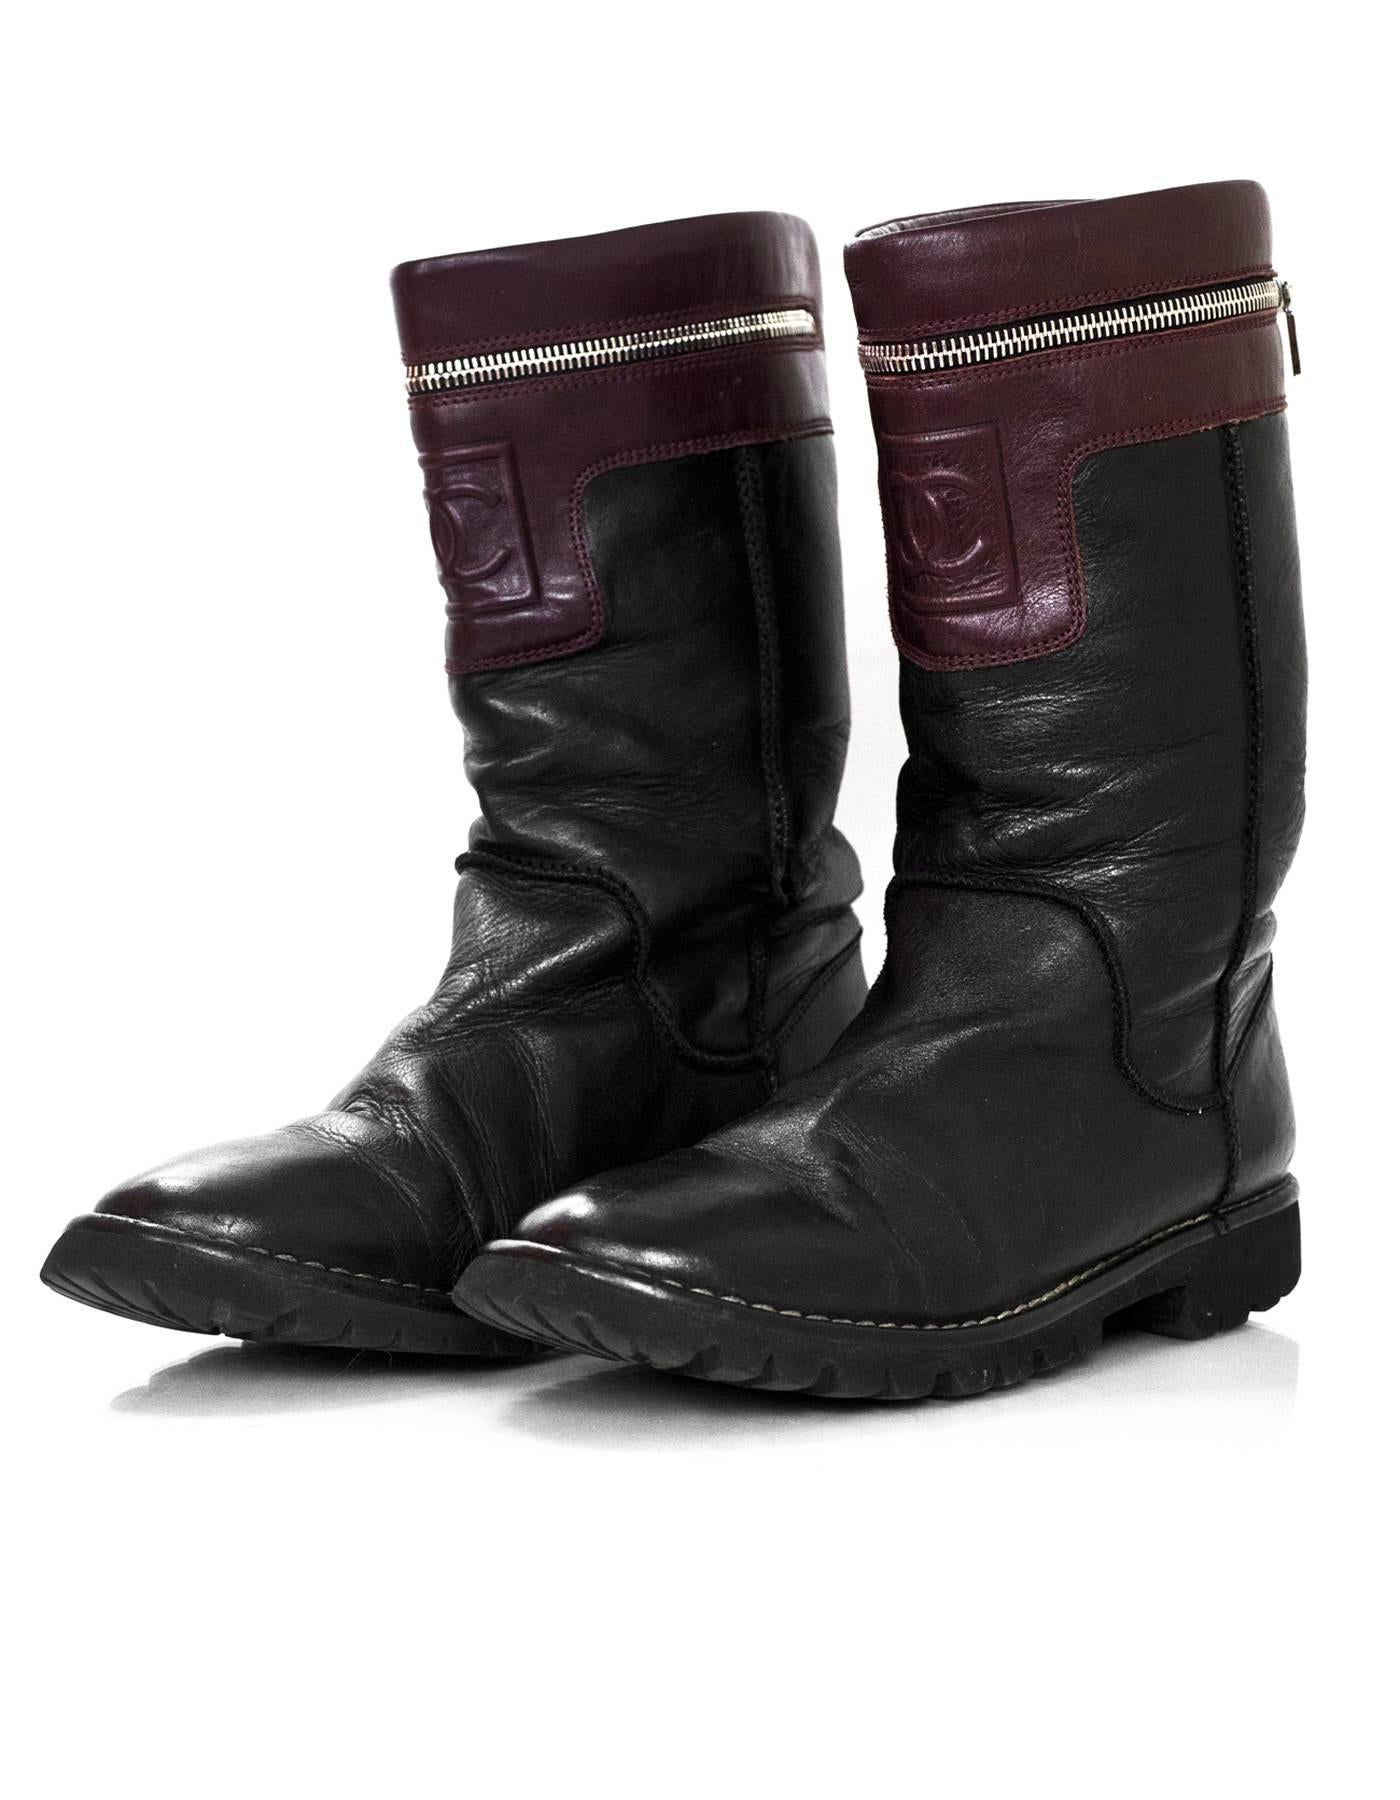 Chanel Black & Burgundy Calfskin Moto Zipper Boots Sz 40

Made In: Italy
Color: Black, burgundy
Materials: Leather
Closure/Opening: Pull-up
Sole Stamp: Chanel Made in Italy
Retail Price: $1,195 + tax
Overall Condition: Very good pre-owned condition